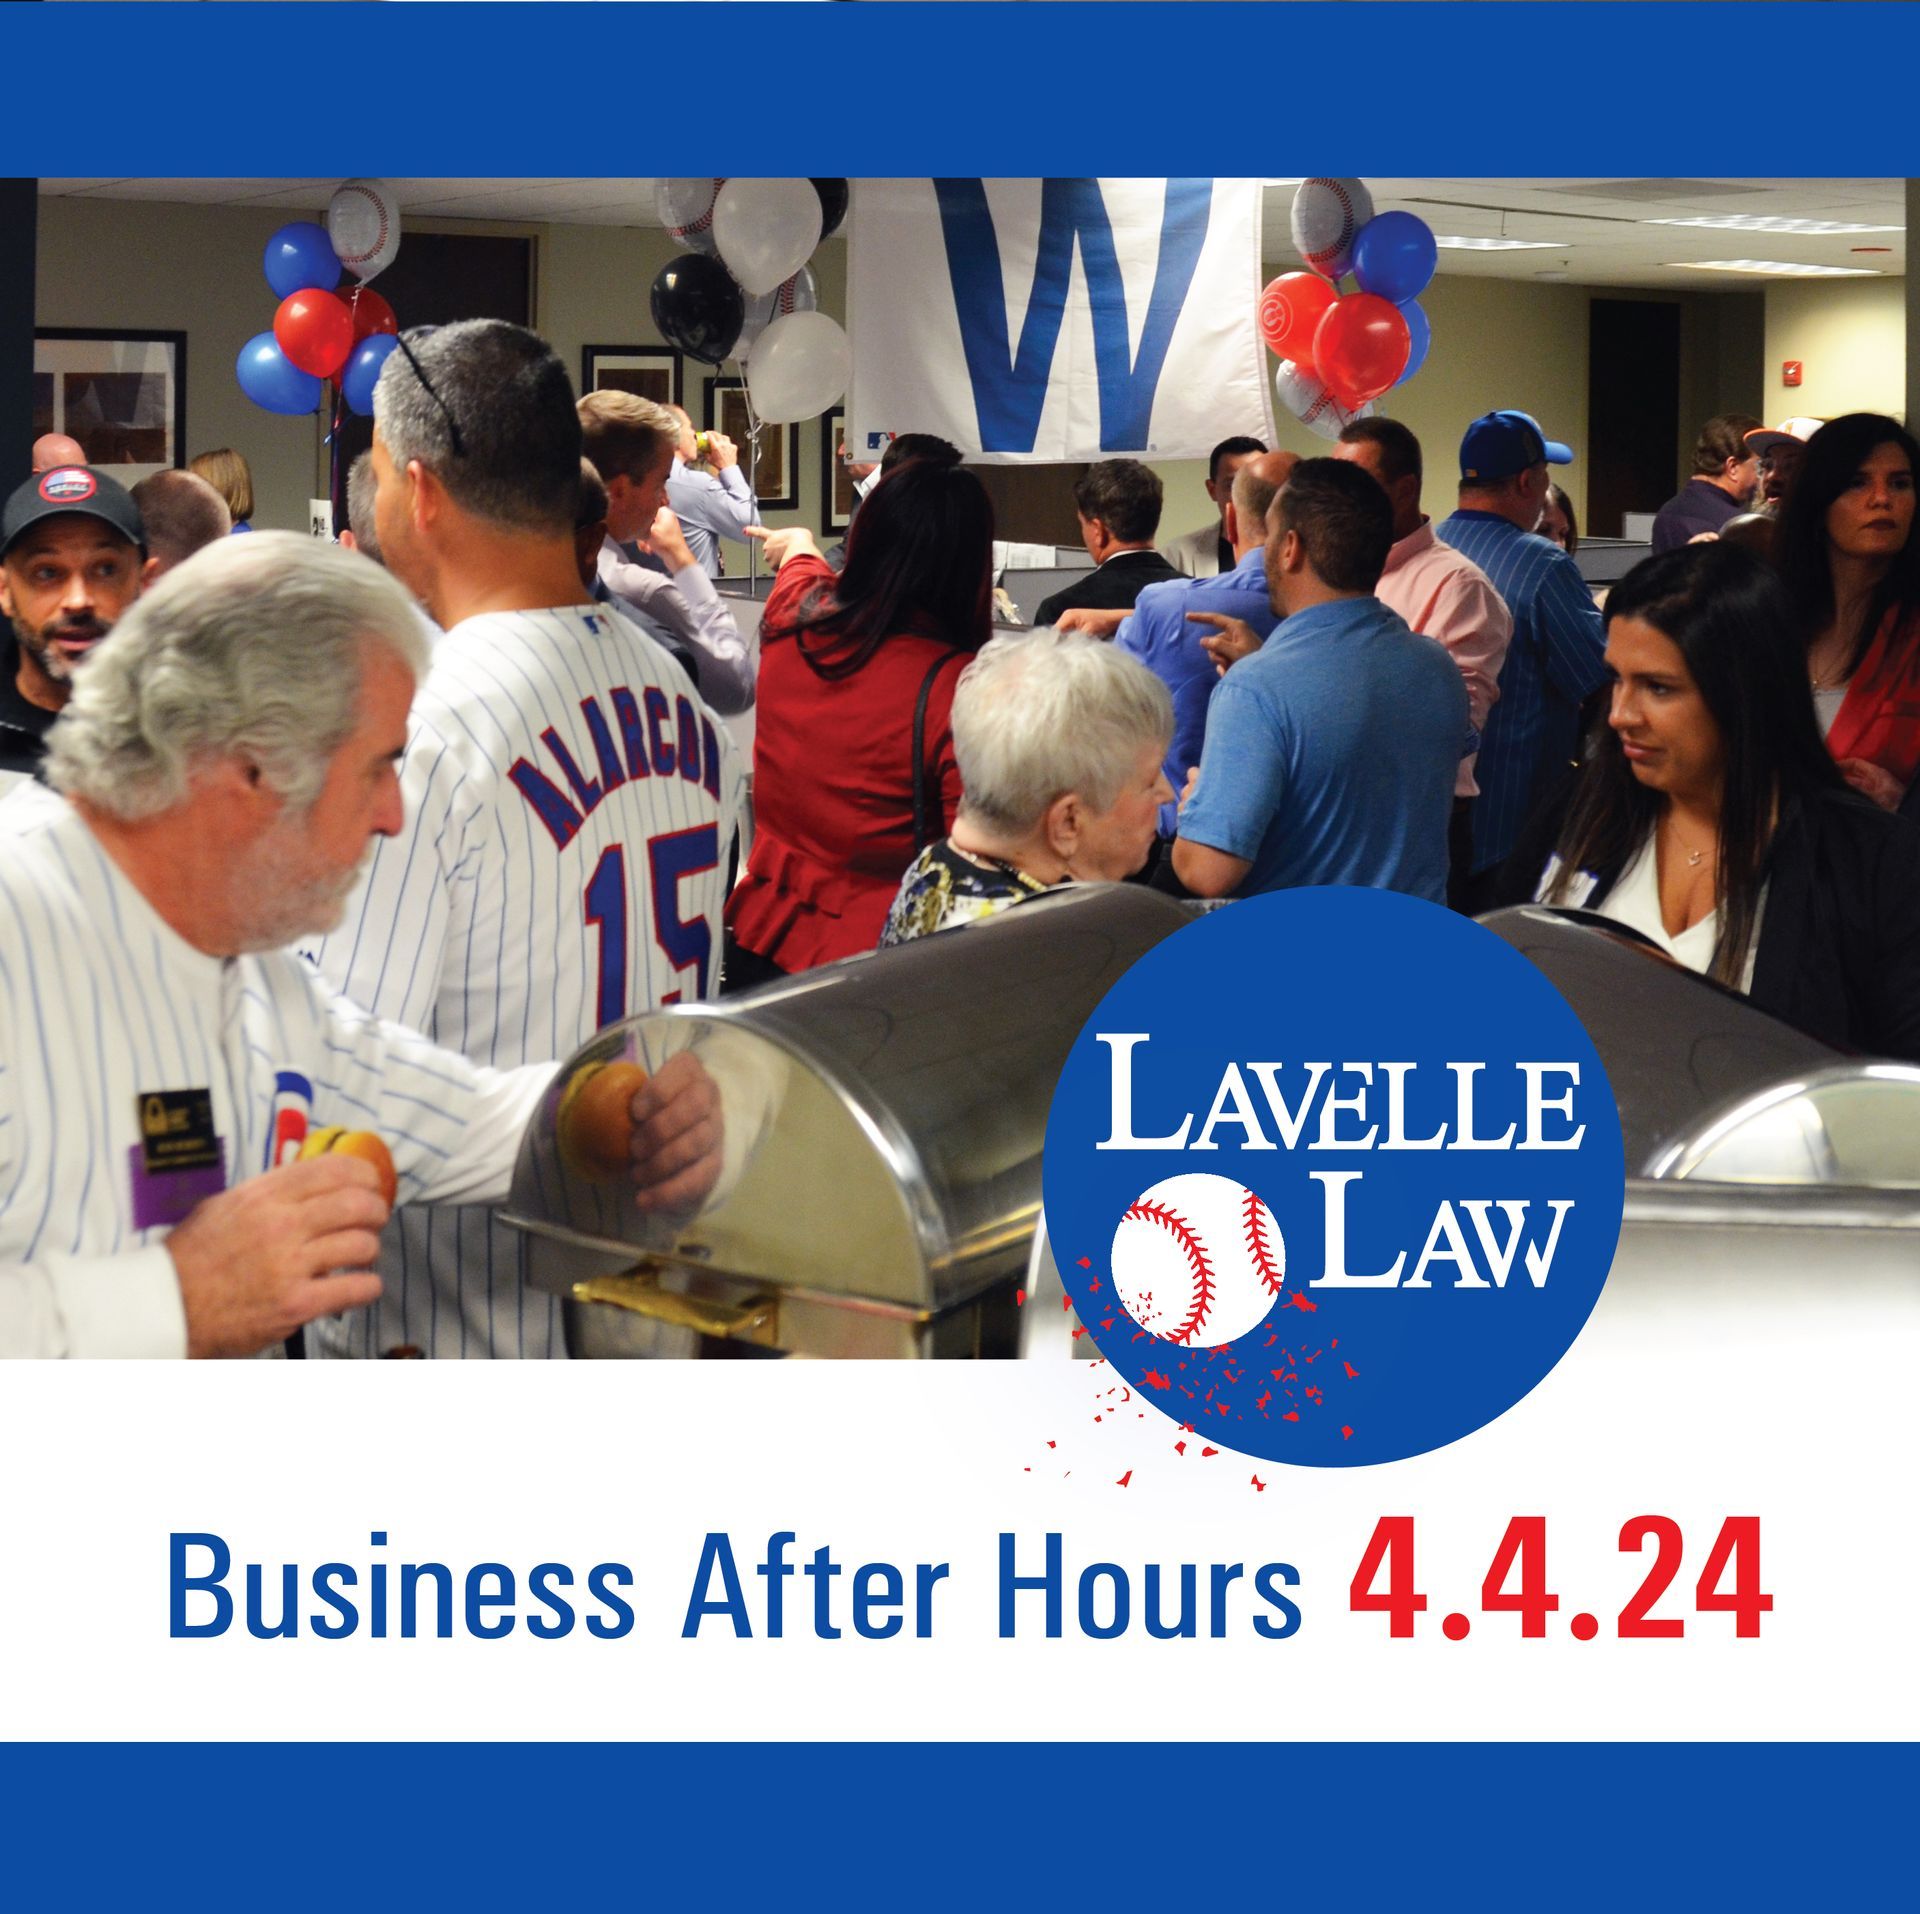 Join us on April 4, 2024, for Business After Hours!